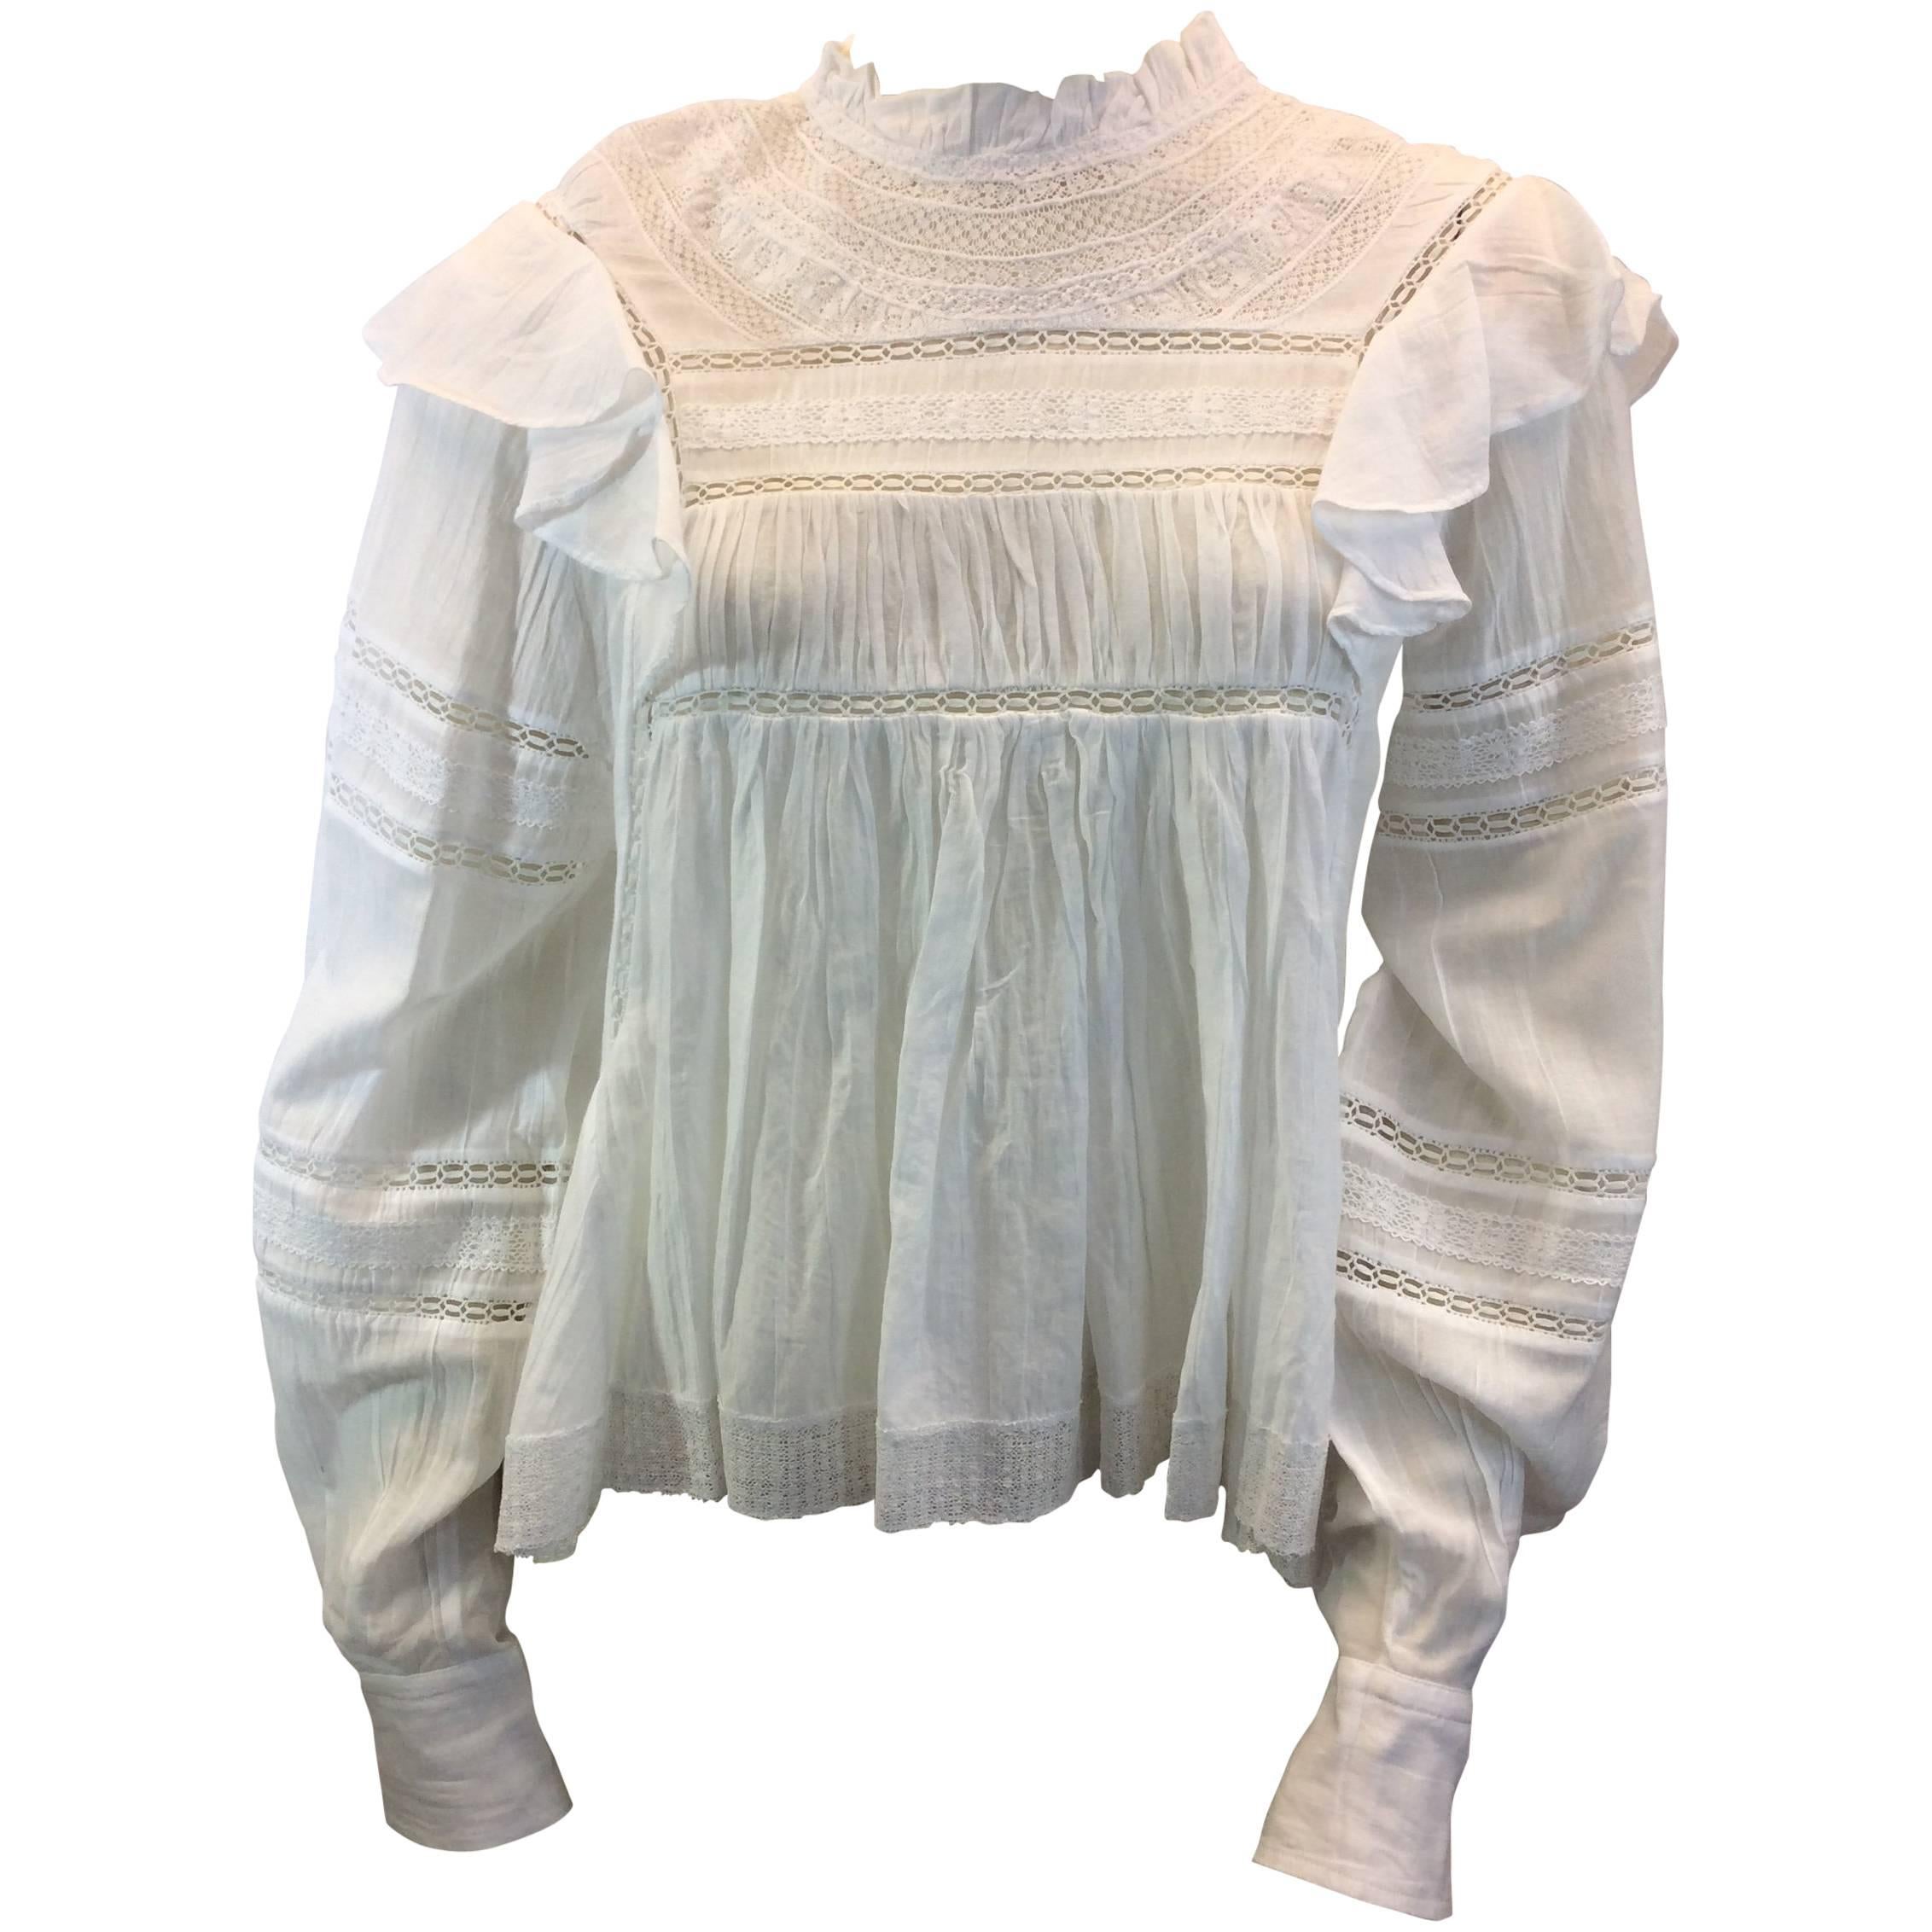 Isabel Marant White Cotton Lace Blouse NWT For Sale